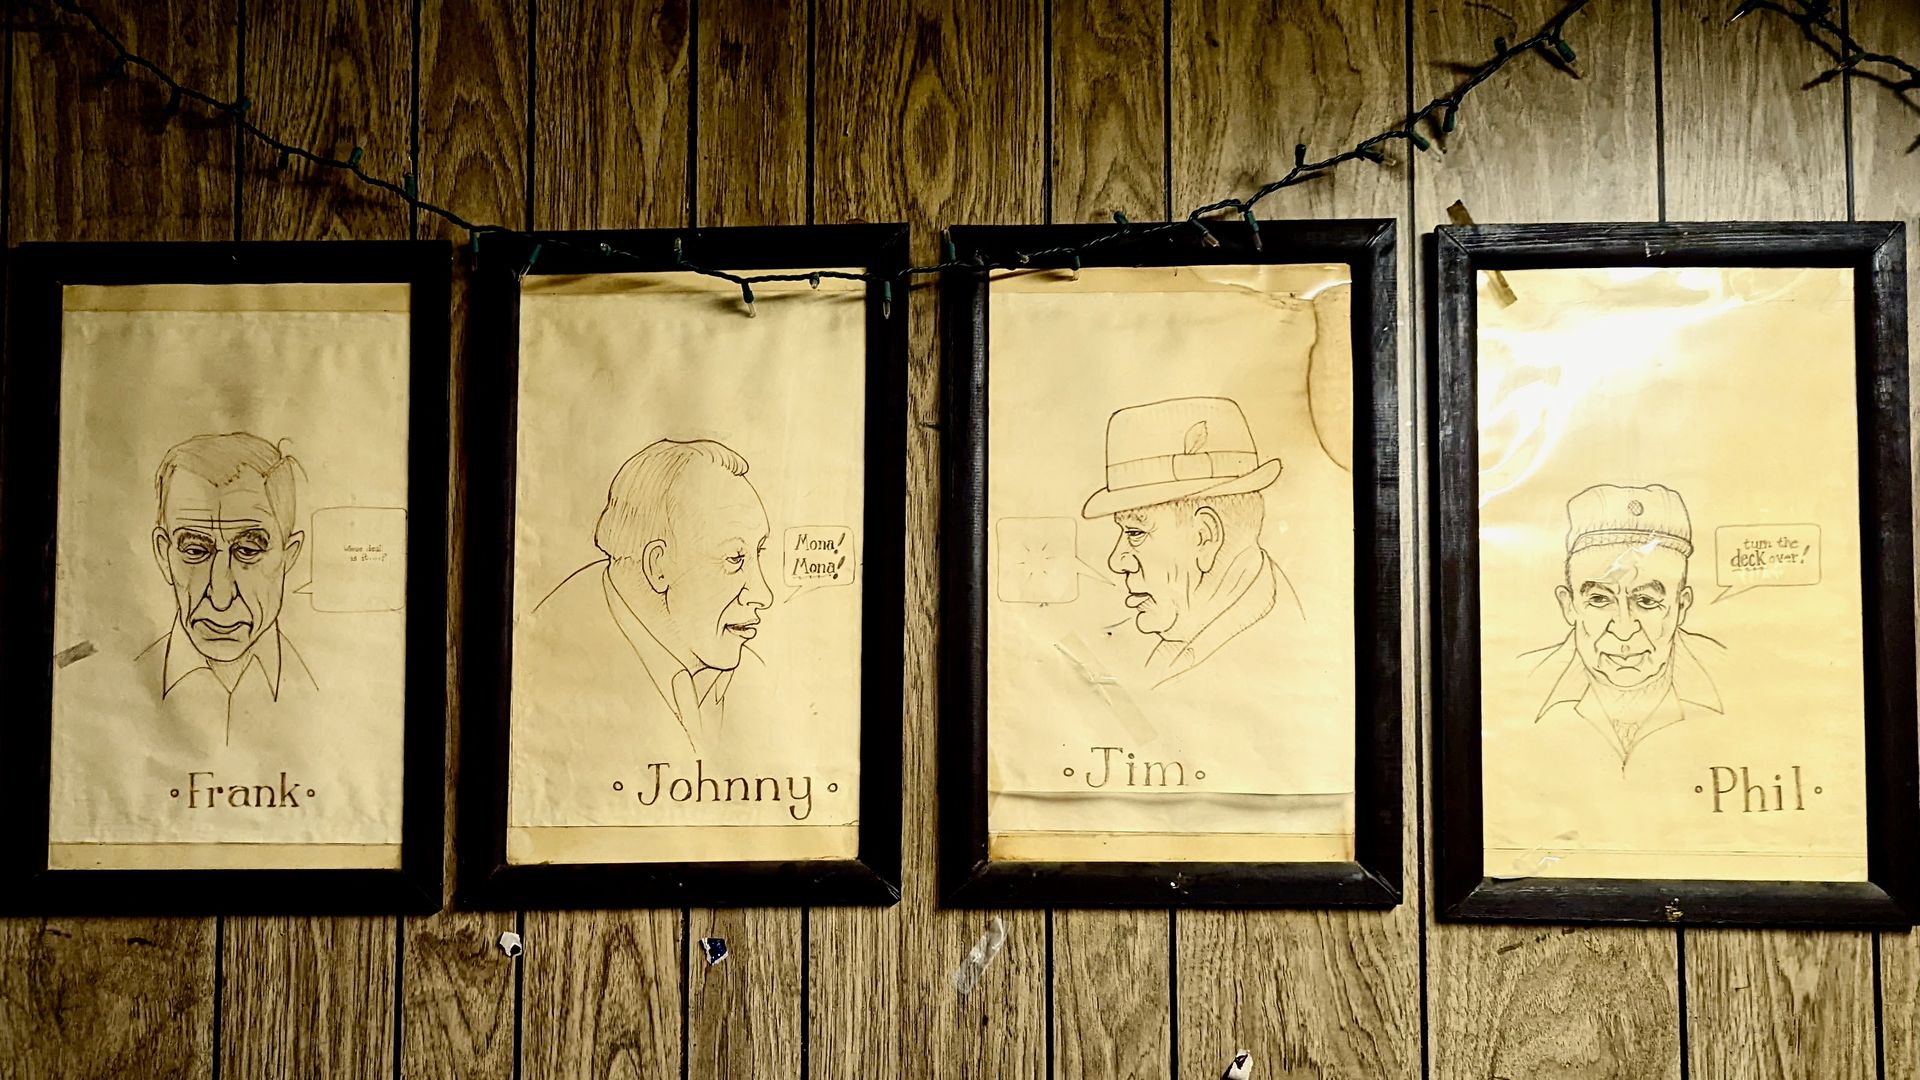 Drawn portraits of men, labeled with their names: Frank, Johnny, Jim and Phil. Hanging on a wood-paneled wall.